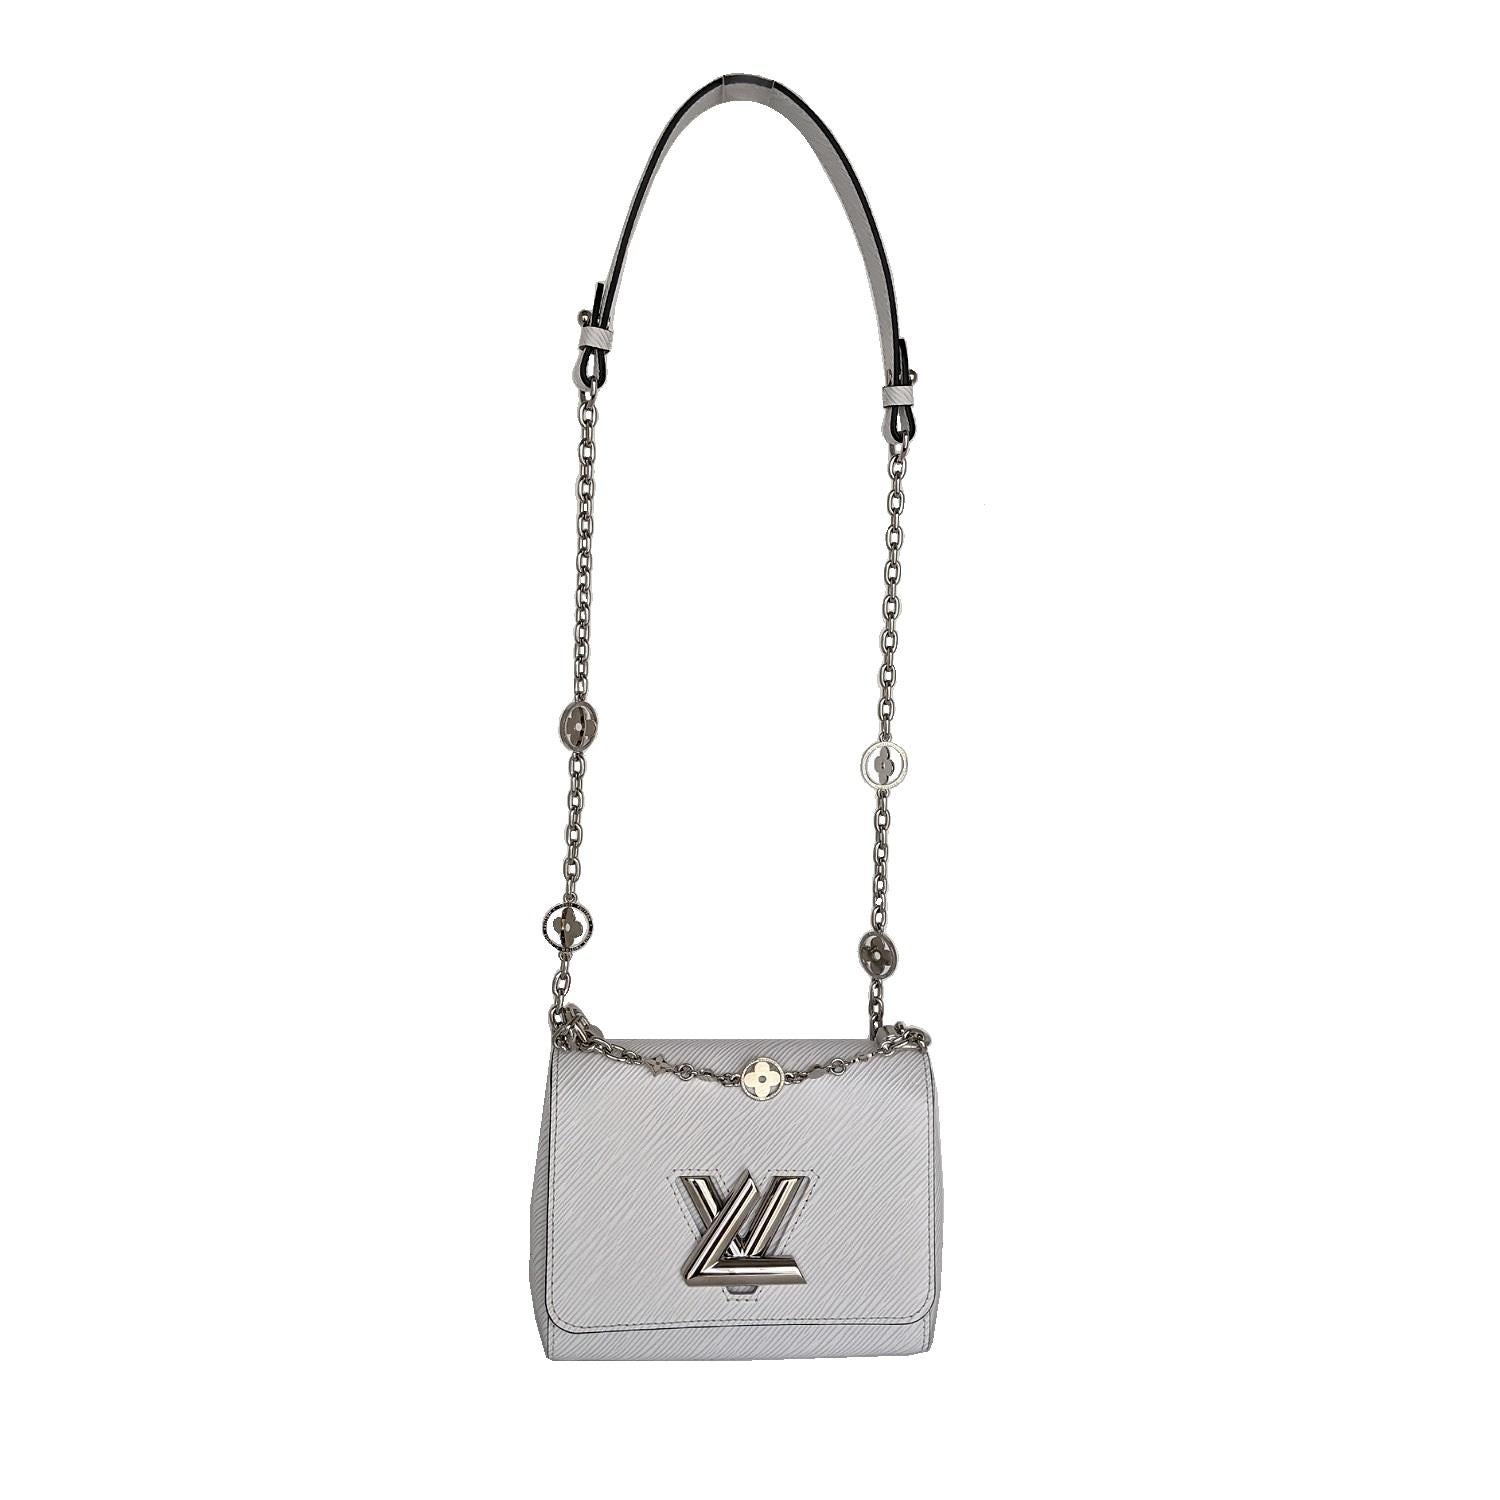 This Louis Vuitton’s iconic Twist belongs to the Twist Flower Jewels special edition. Crafted from White grained Epi leather, it features a sparkling, crystal-embellished chain adorned with Monogram Flowers, which playfully rotate inside their